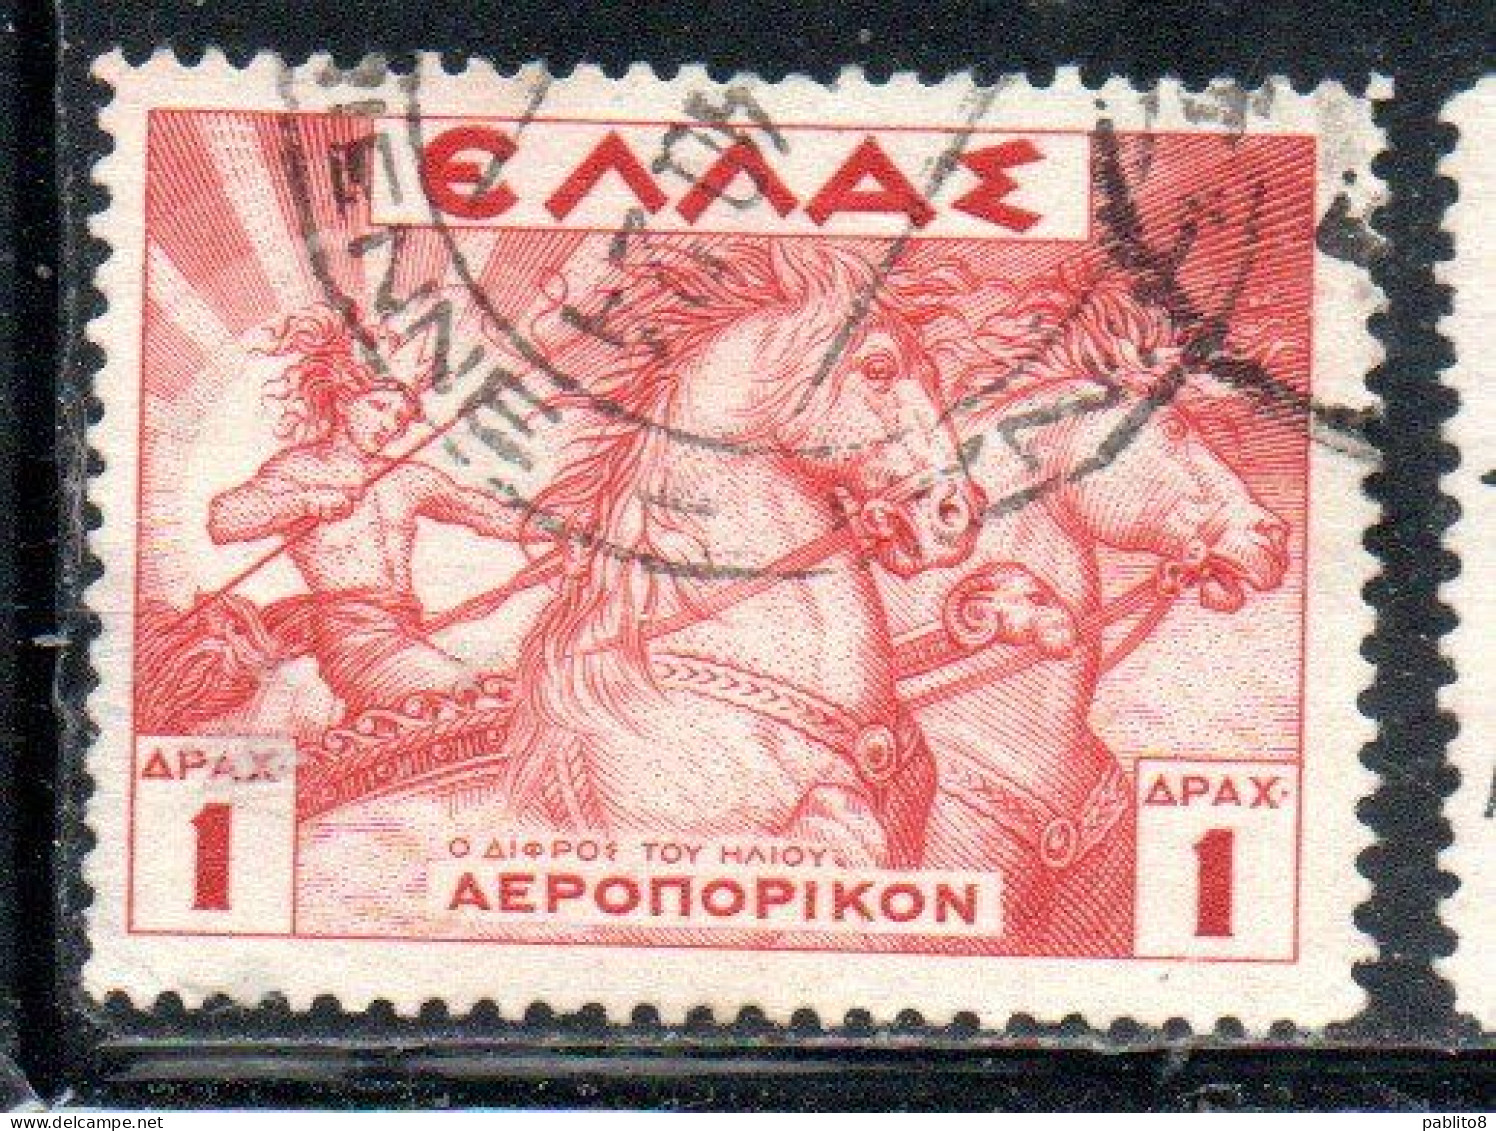 GREECE GRECIA ELLAS 1935 AIR POST MAIL AIRMAIL MYTHOLOGICAL HELIOS DRIVING THE SUN CHARIOT 1d USED USATO OBLITERE' - Usati